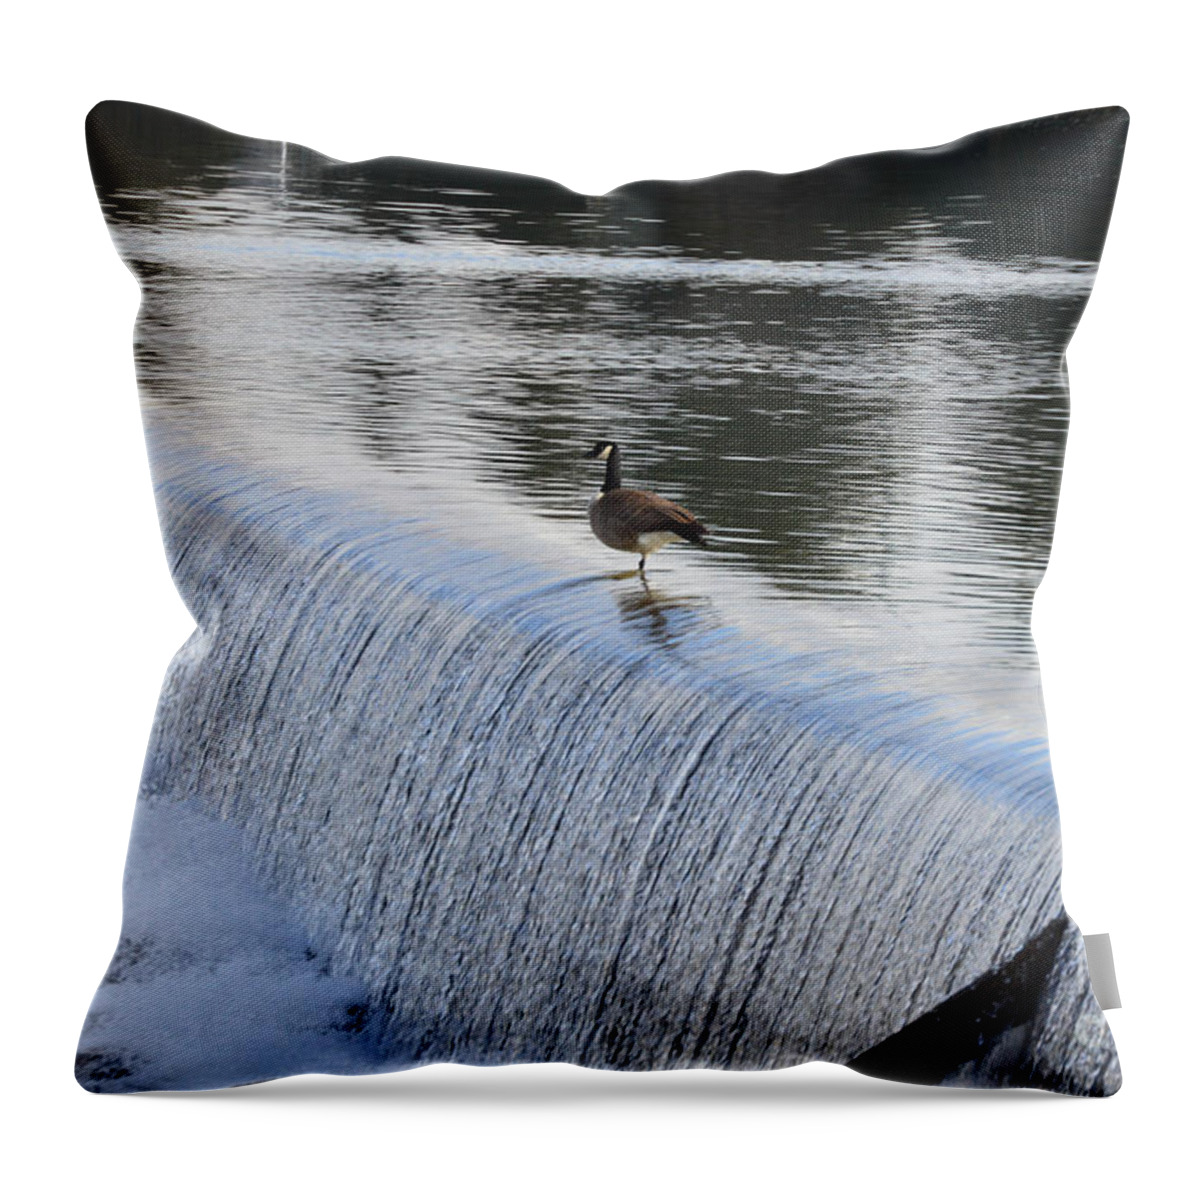 Geese Throw Pillow featuring the photograph Female Geese 02 by Kip Vidrine